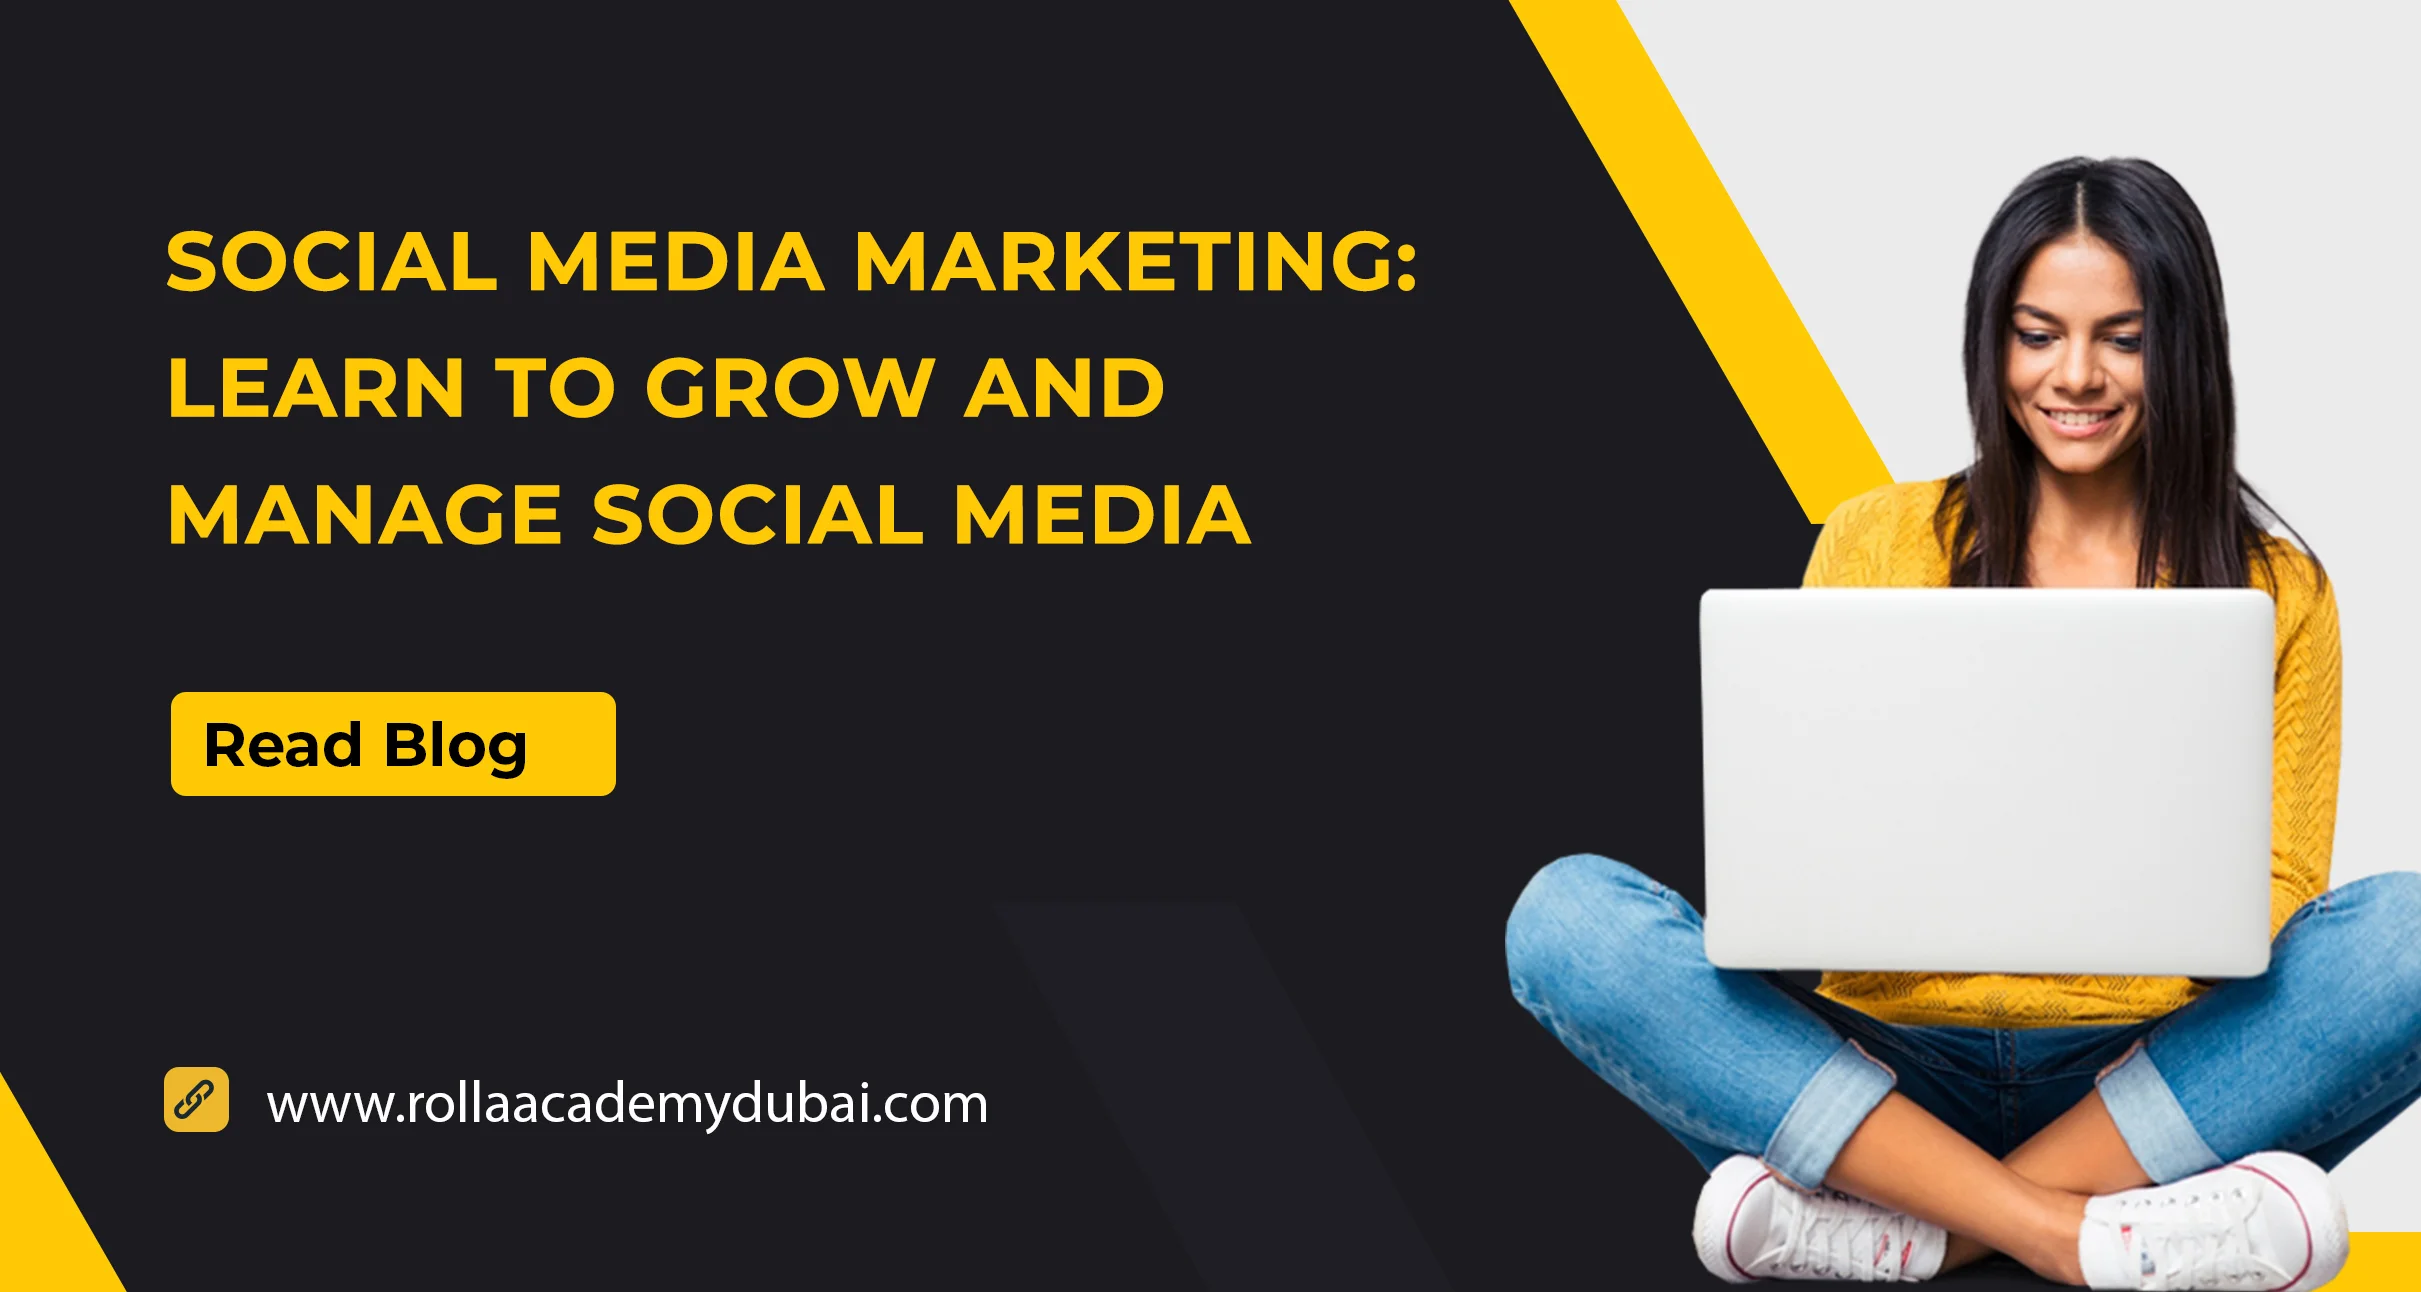 Social Media Marketing: Learn to Grow and Manage Social Media